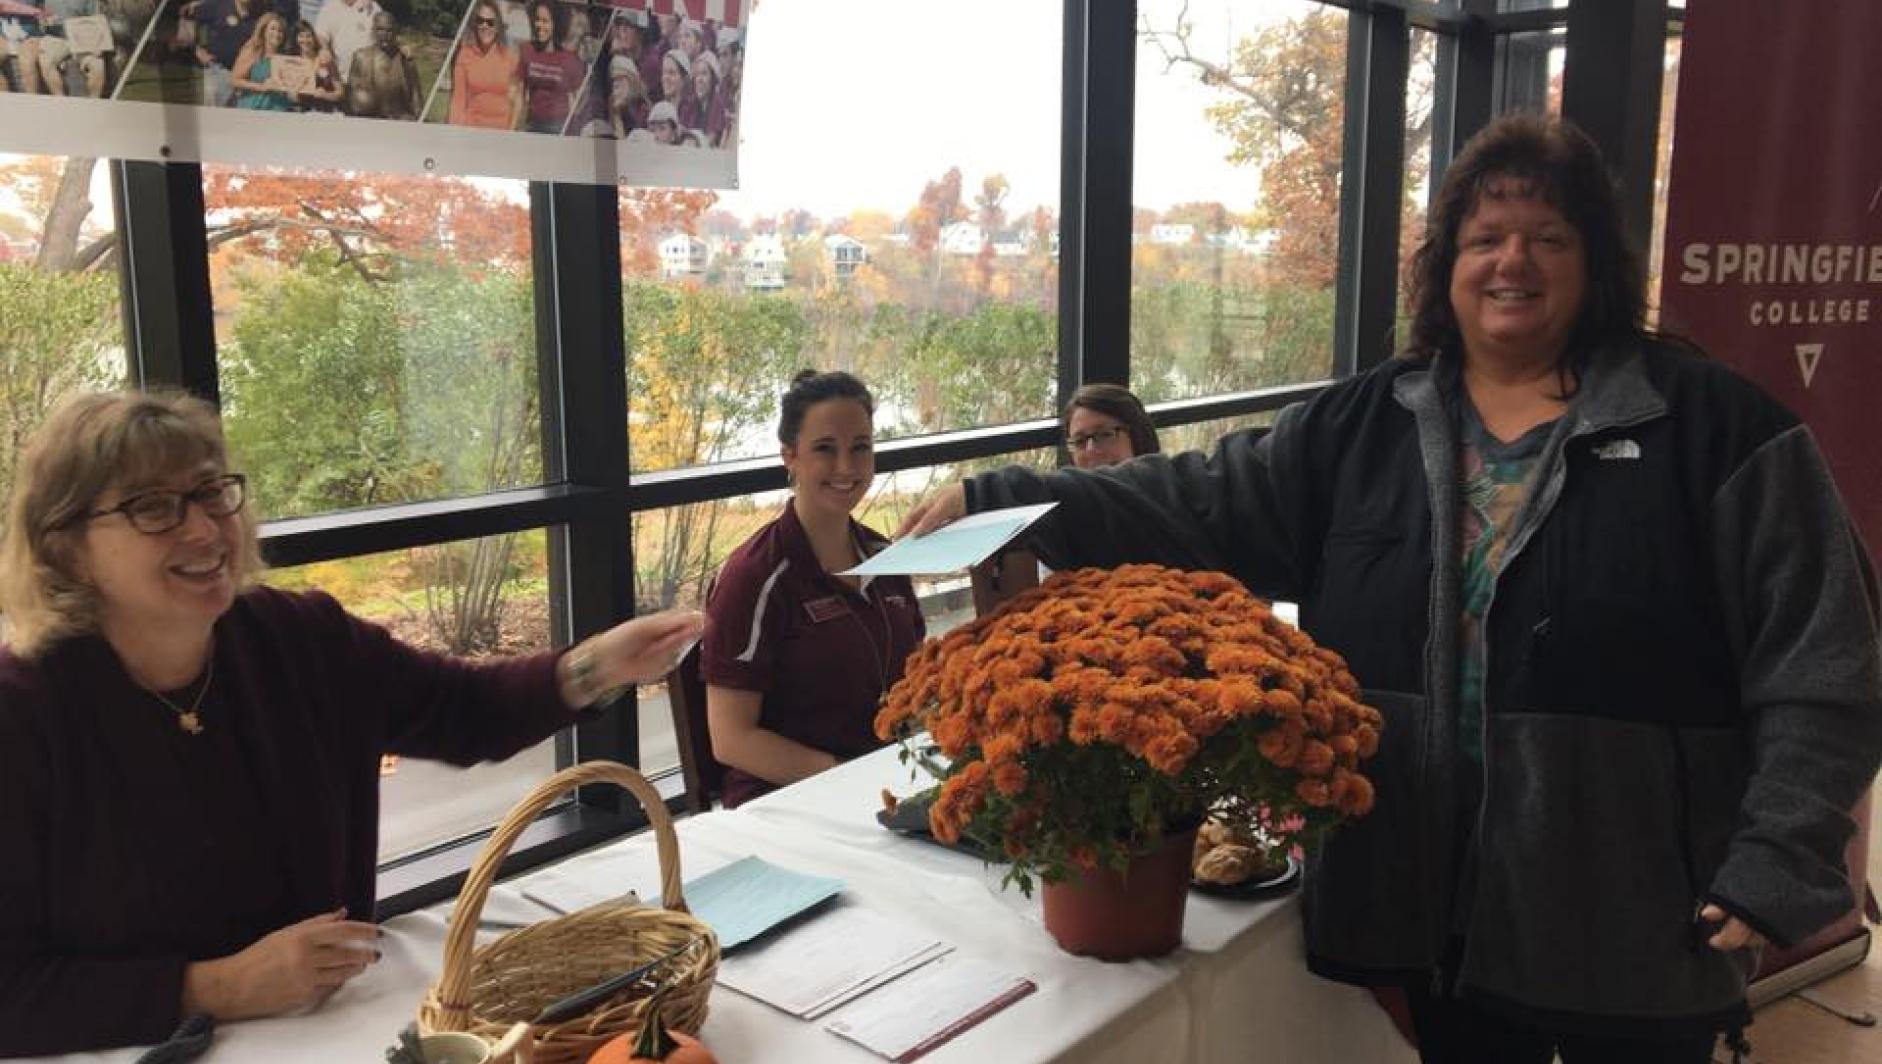 A Springfield College staff member makes a suggestion at the referral table during the day of recruitment.